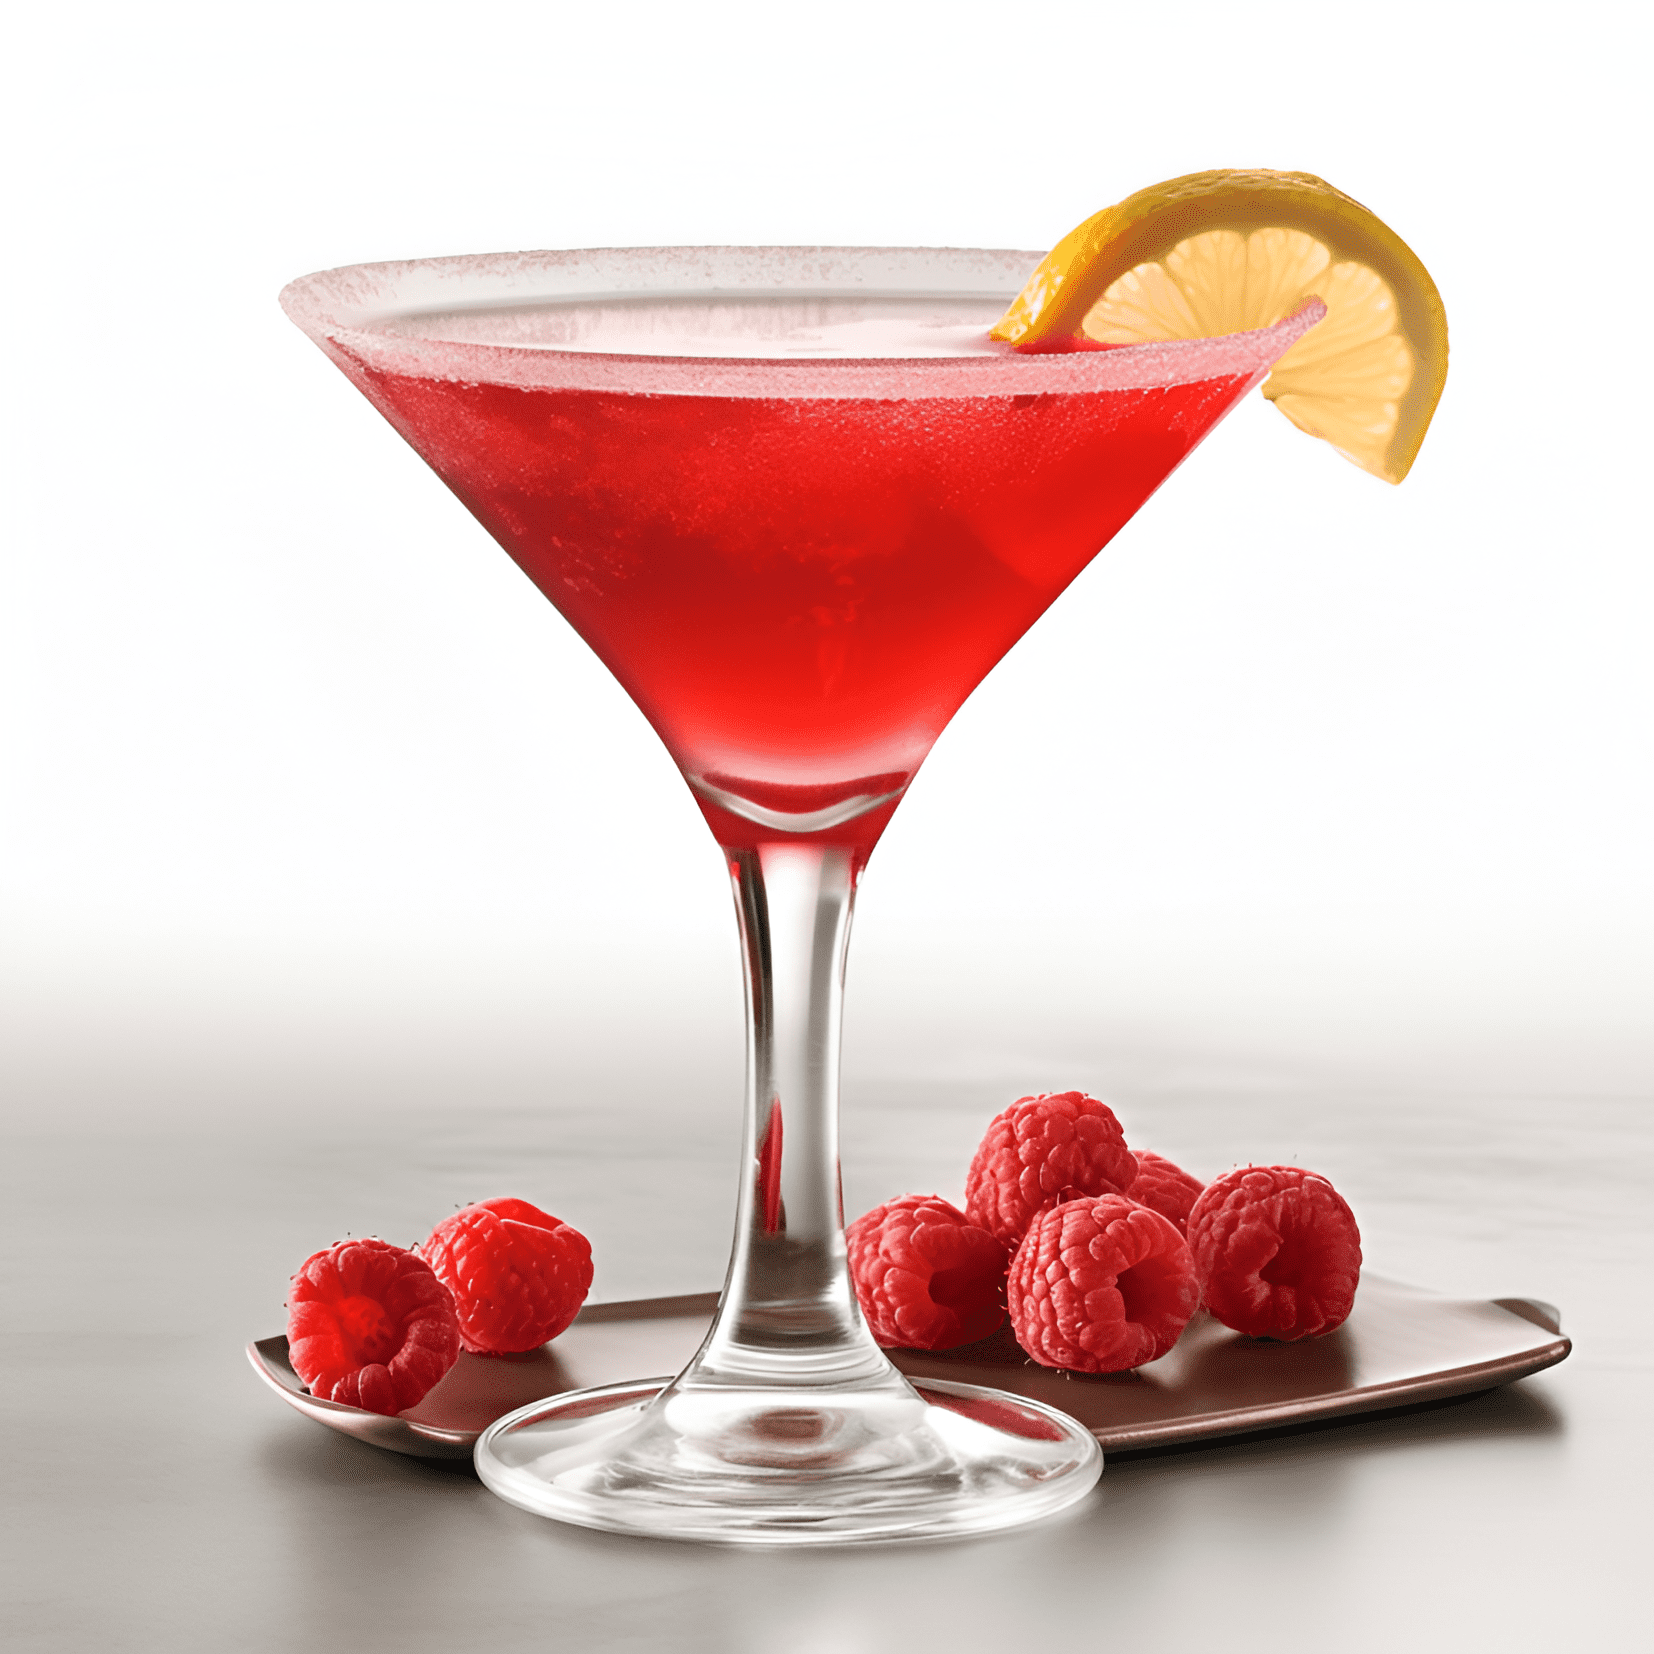 Raspberry Kiss Cocktail Recipe - The Raspberry Kiss cocktail offers a harmonious blend of sweet, tangy, and slightly tart flavors. The fruity raspberry notes are complemented by the citrusy undertones, while the vodka adds a subtle kick. The overall taste is refreshing, light, and perfect for sipping on a warm summer evening.